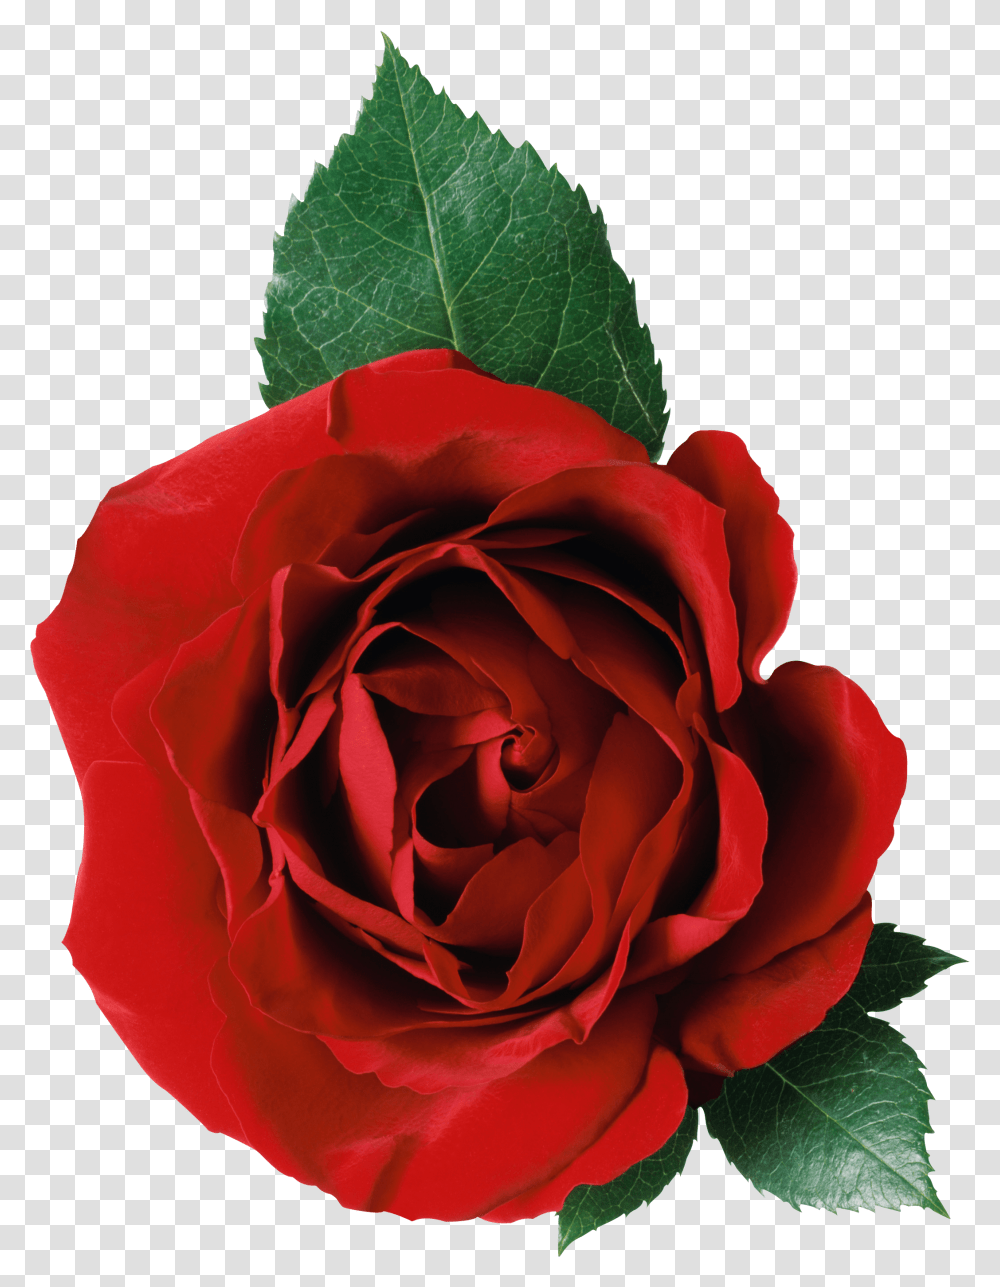 One Rose And Leaves Rose Flower, Plant, Blossom Transparent Png